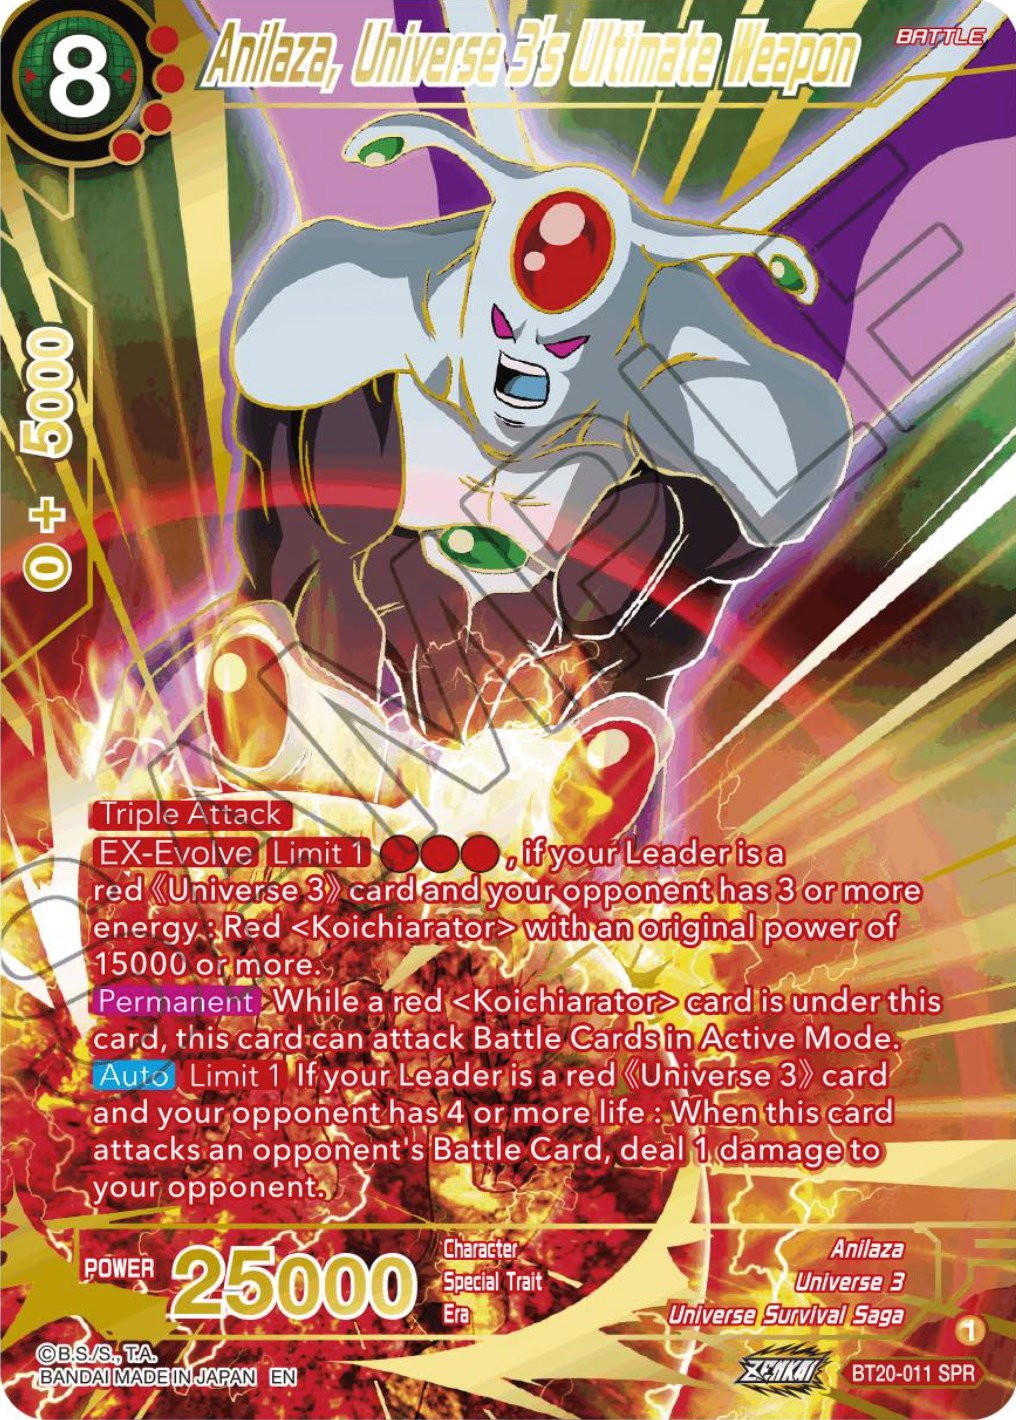 Anilaza, Universe 3's Ultimate Weapon (SPR) (BT20-011) [Power Absorbed] | North Valley Games